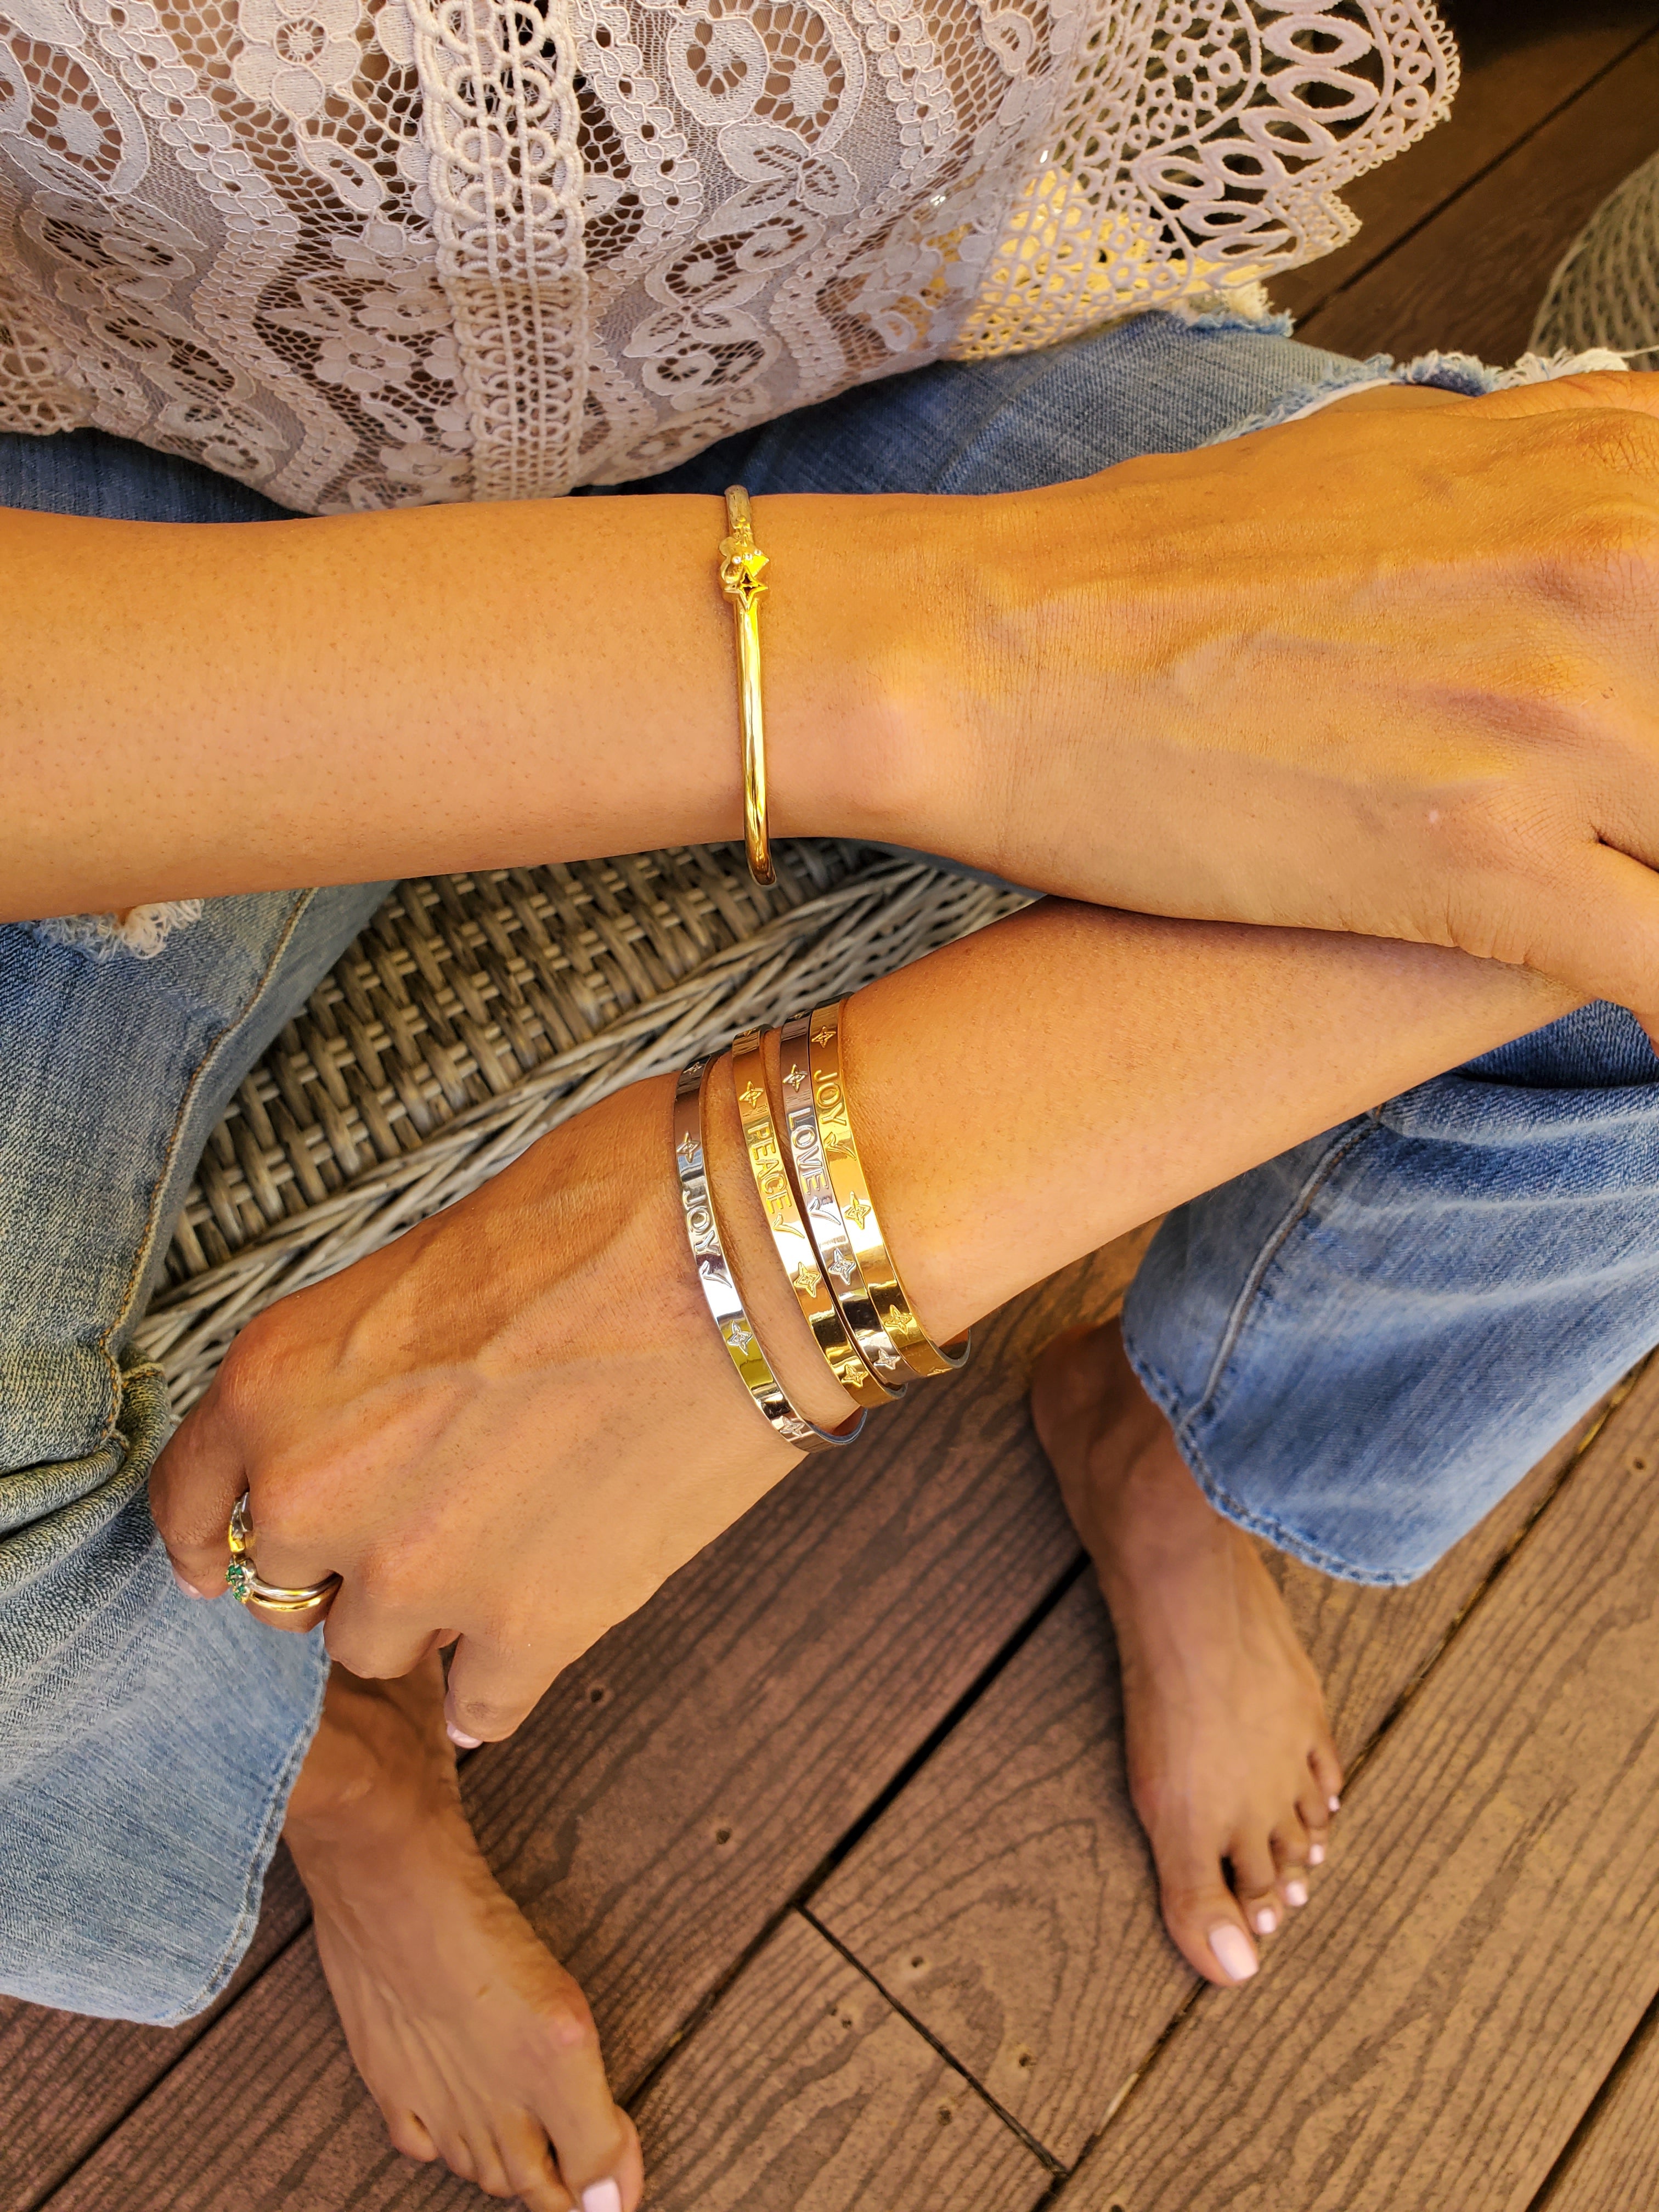 Bracelets that link wrist and fingers gain cachet as jewelry pieces